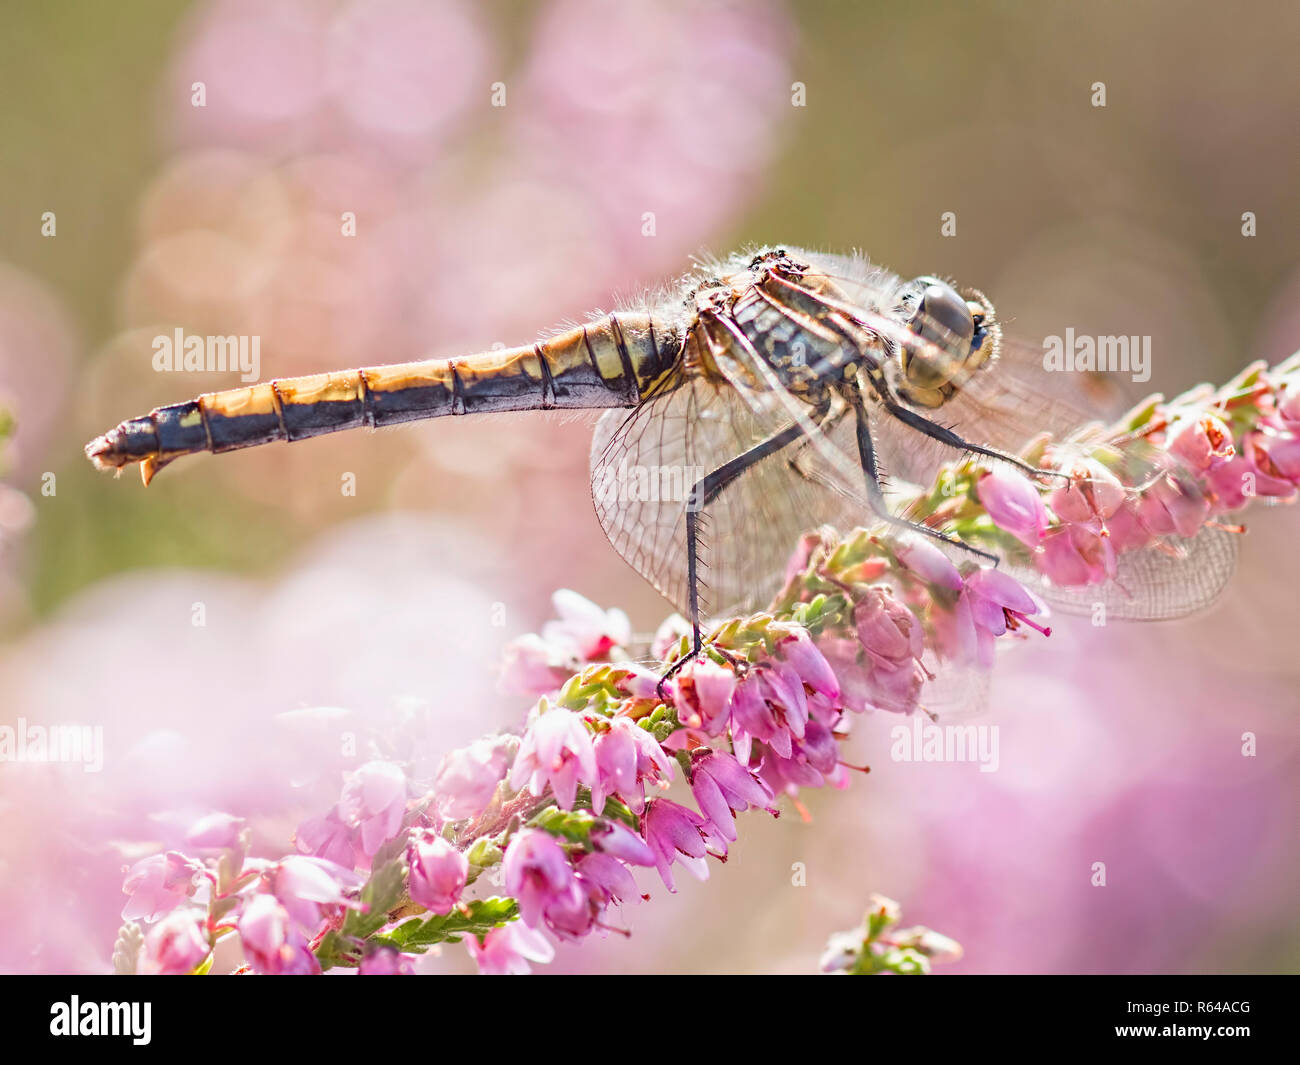 Black darter surrounded by pink flowering heather Stock Photo